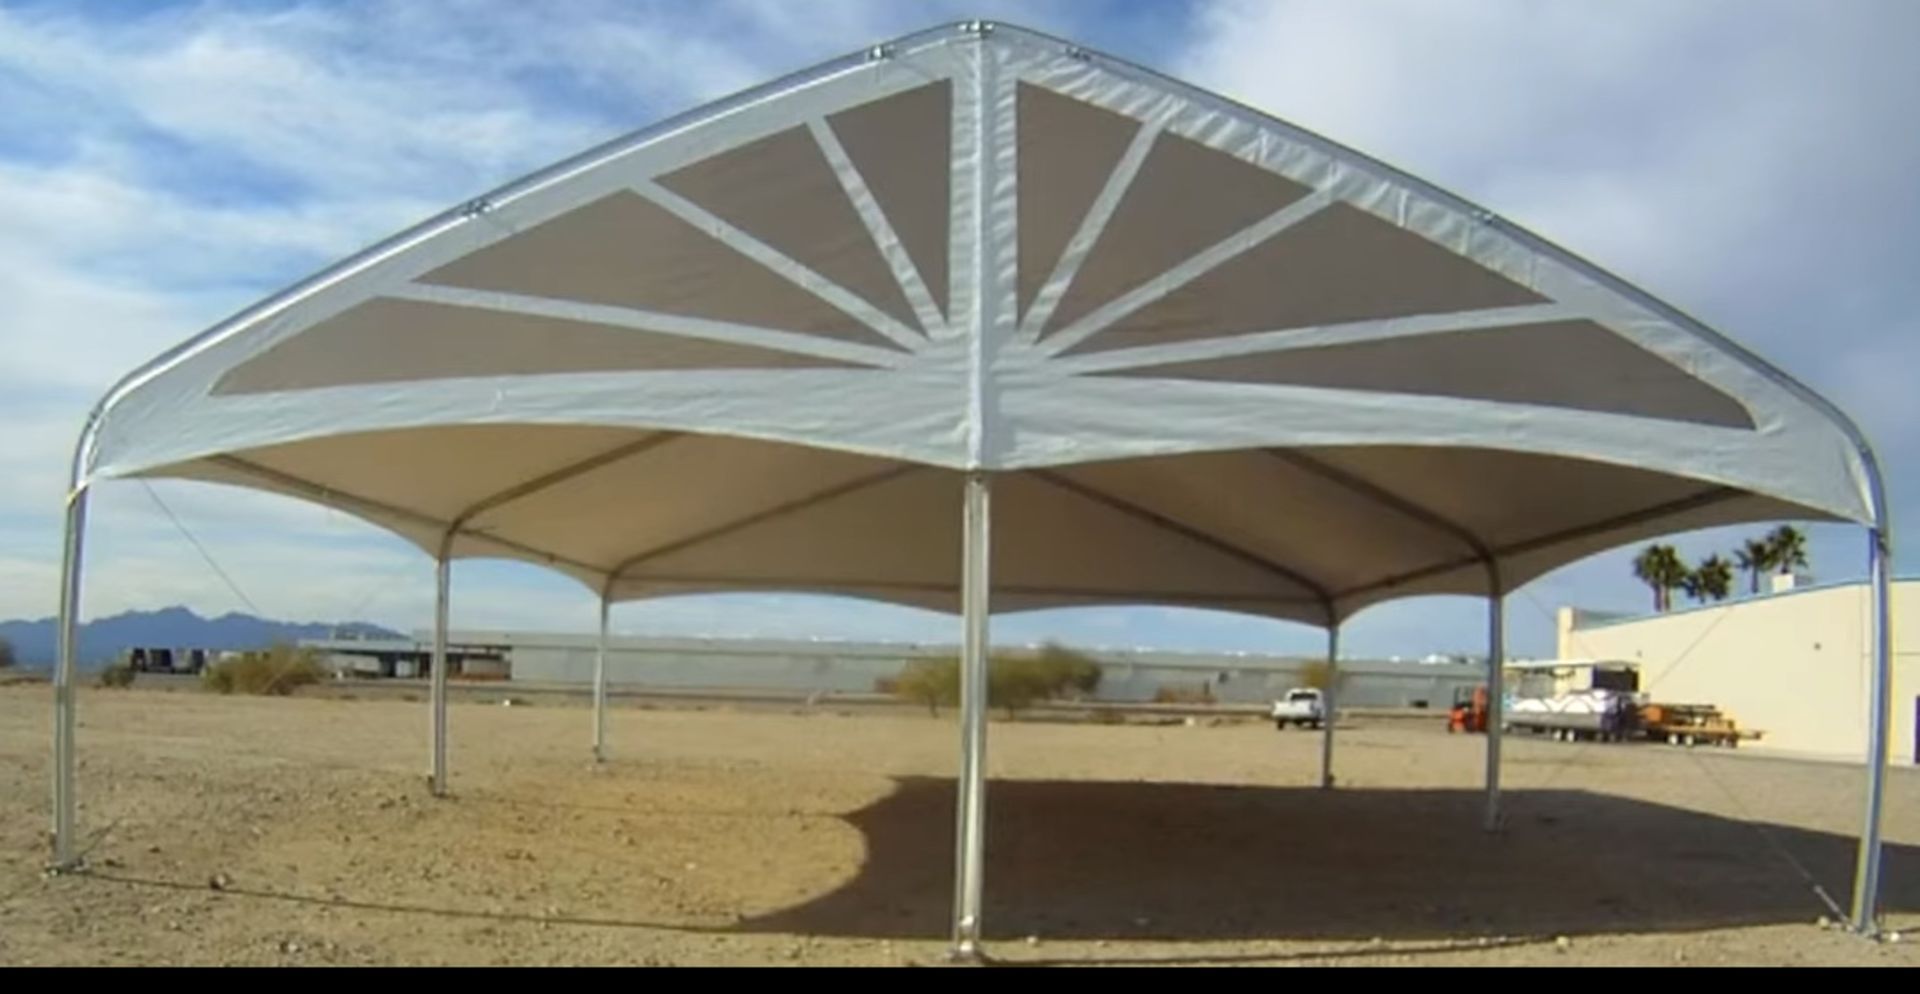 CREATIVE TENT 30' X 50' - 022 FAST TRACK SYSTEM WITH SHASTA PEAK KIT ADDON AND FULL SIDING (Like New